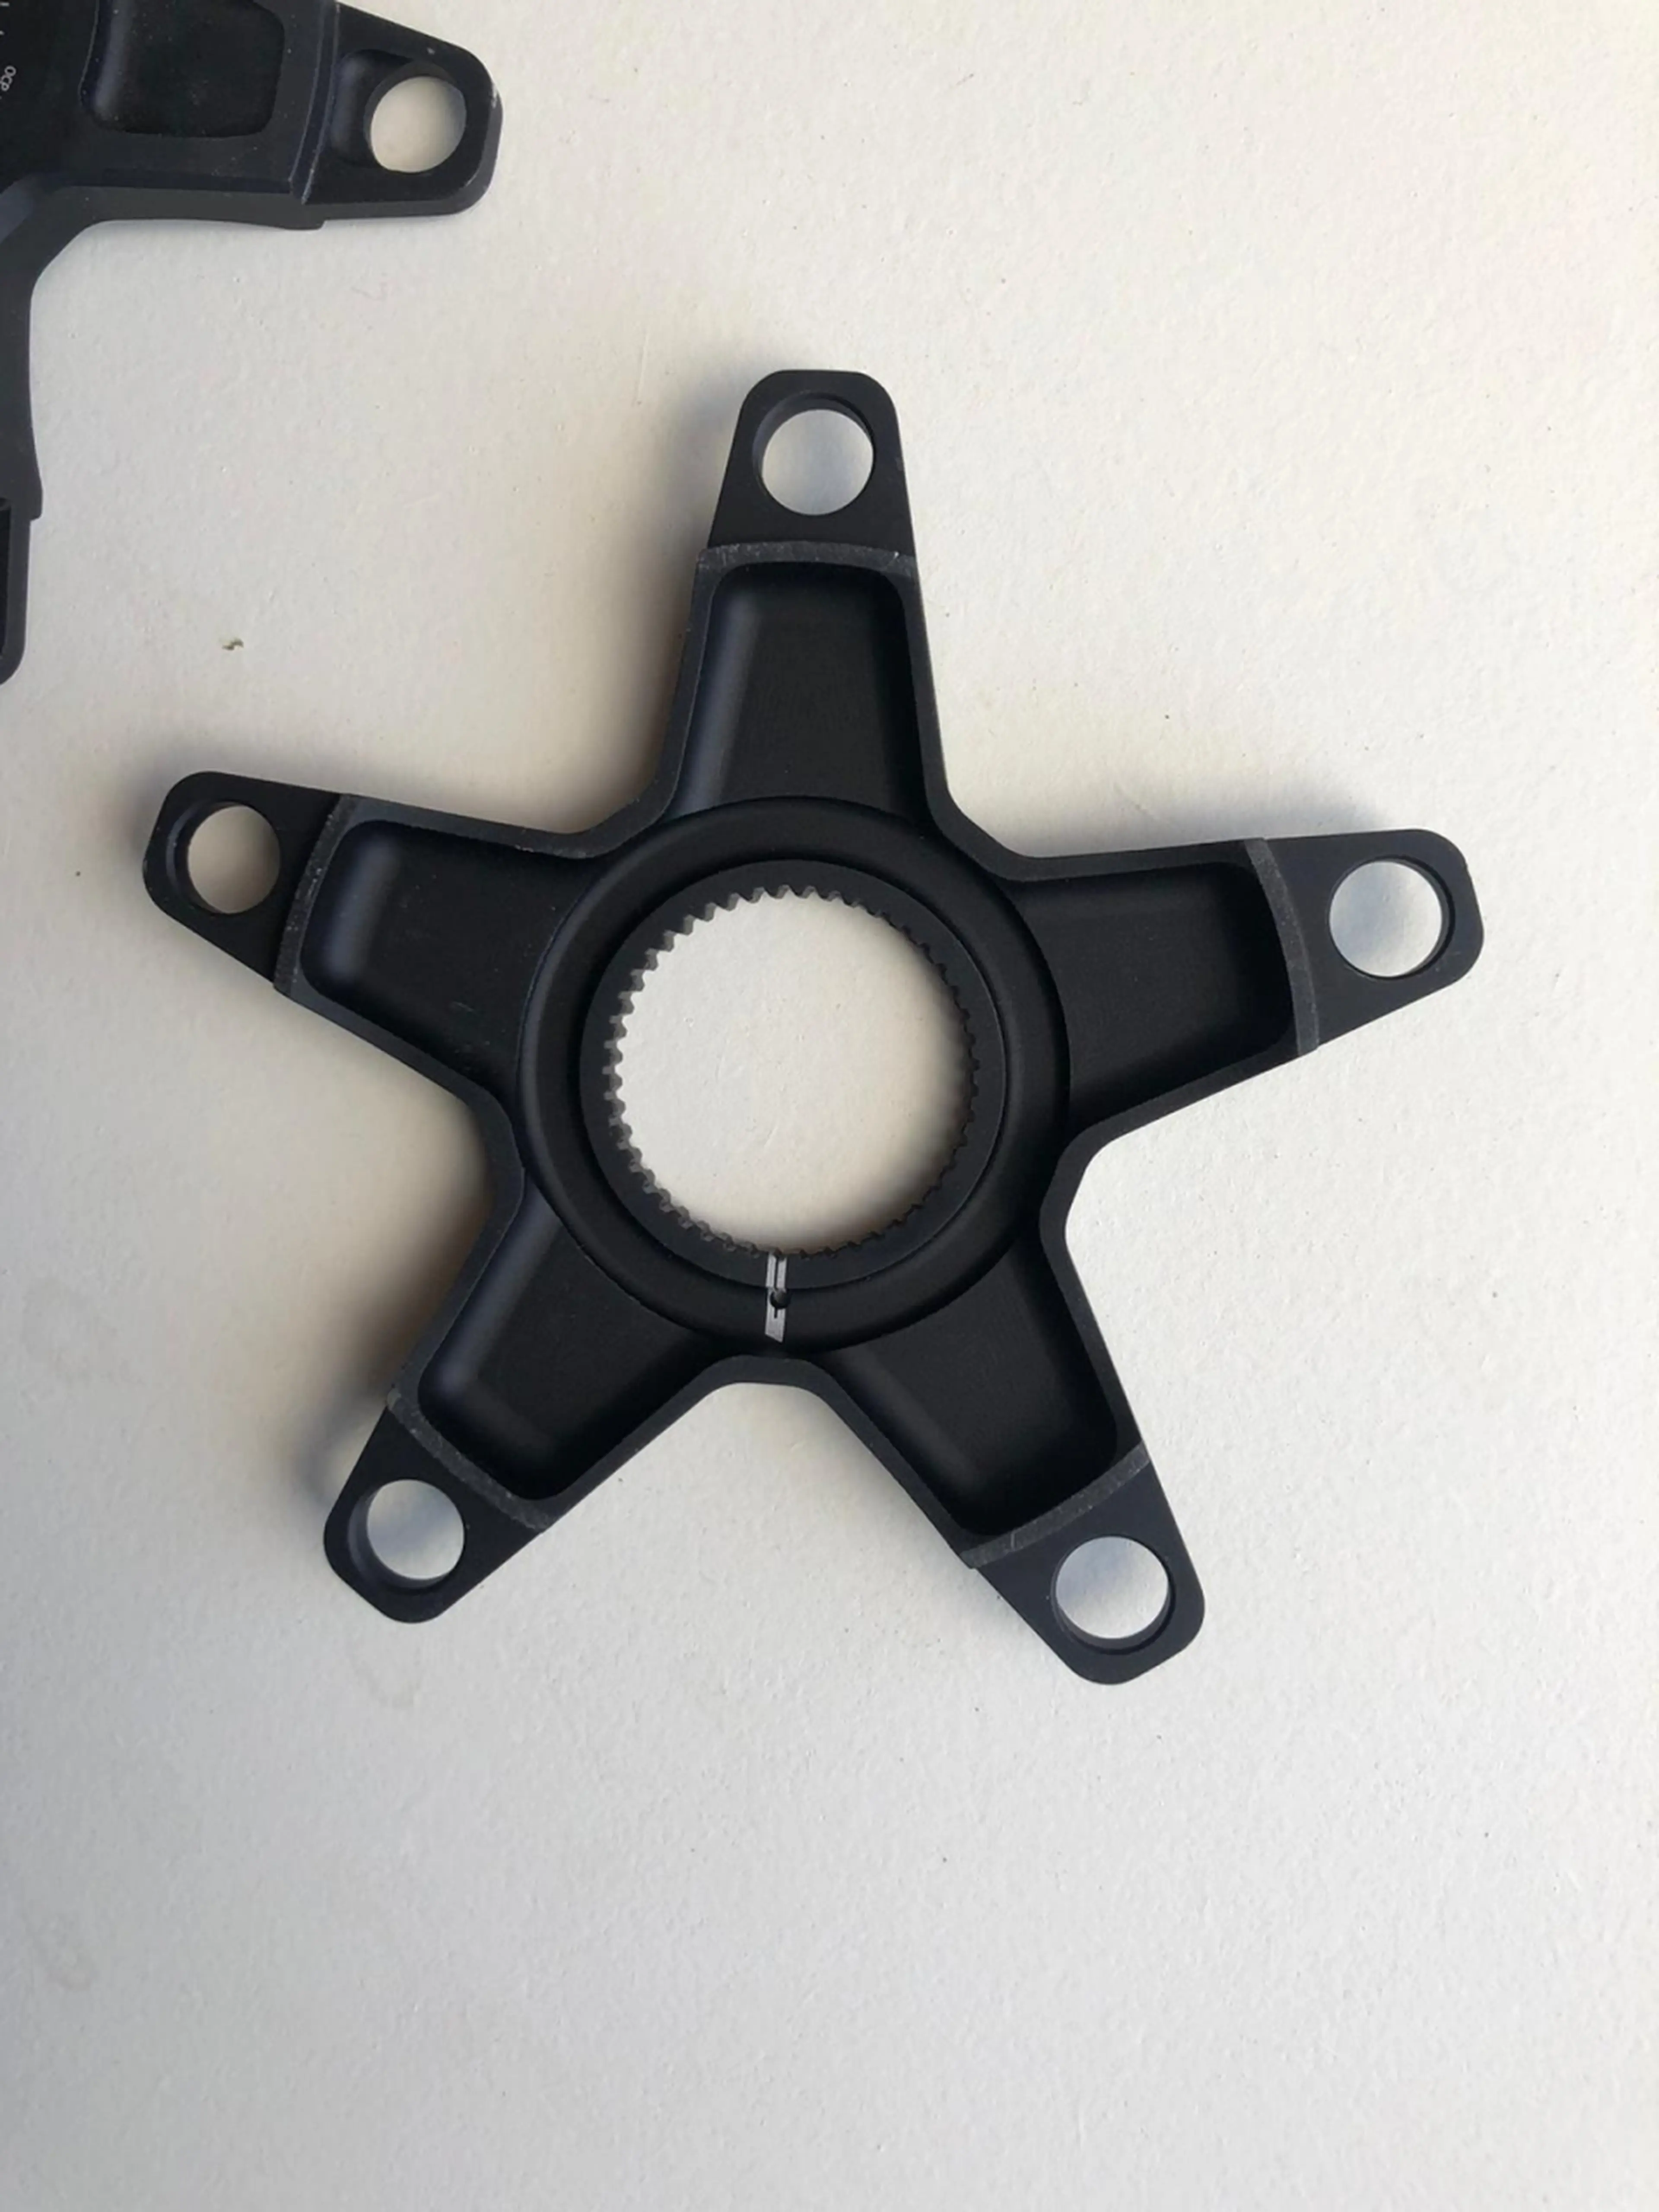 2. Spider rotor bcd 110